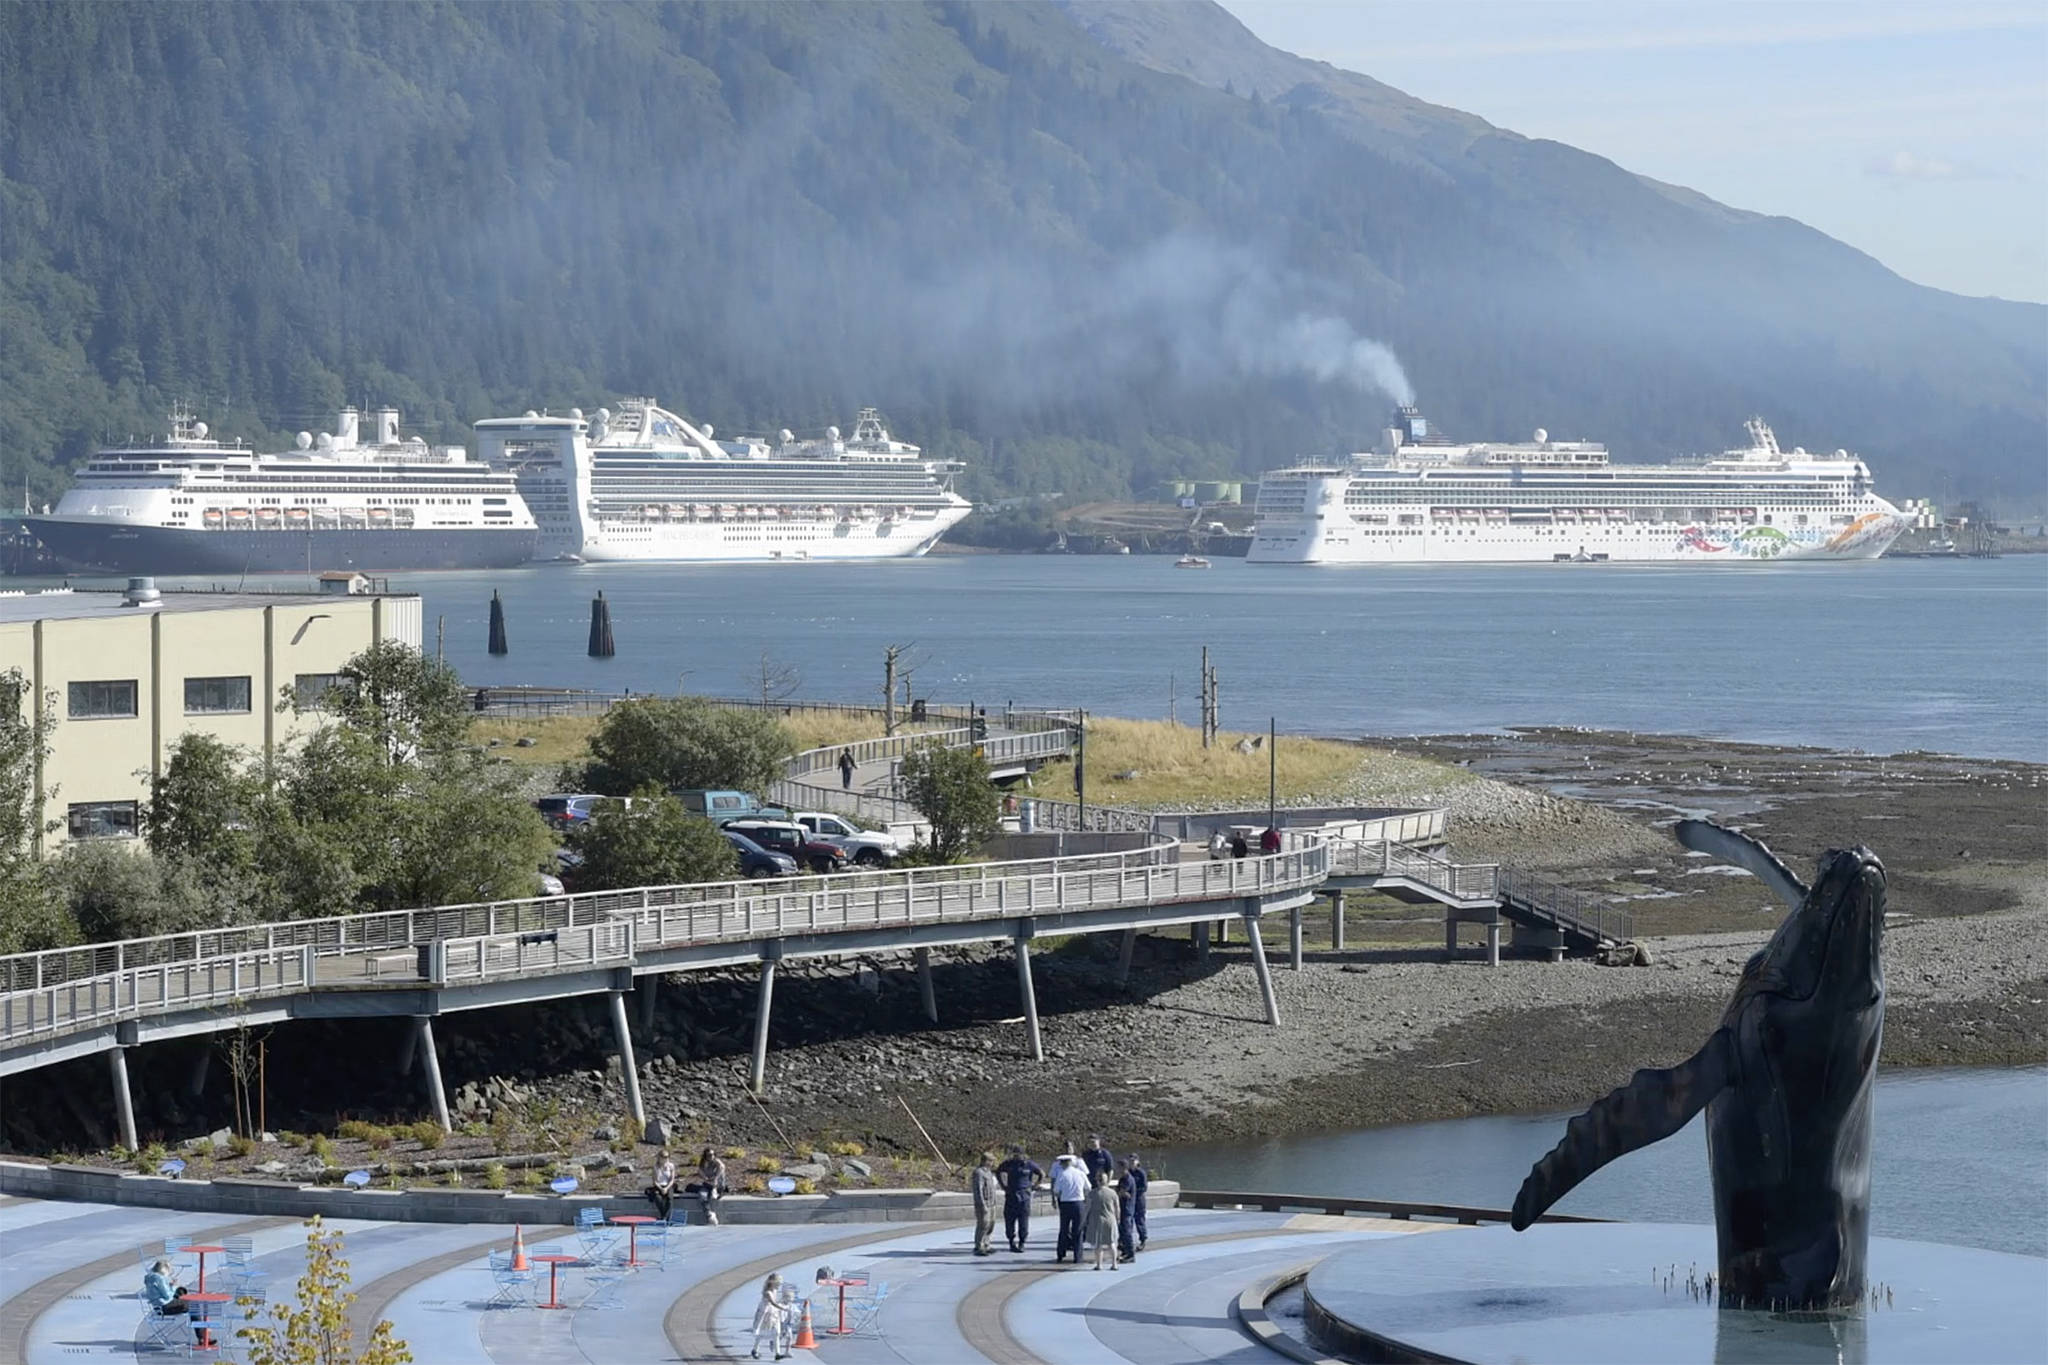 The City and Borough of Juneau is working to correct violations that occurred at two of their three wastewater treatment facilities between 2015 and 2019. Many of the violations occurred during a summer construction project at the Juneau-Douglas facility, which was accepting wastewater from cruise ships during the construction process. A number of effluent violations were reported from that timeframe. Norwegian Pearl cruise ship, right, pulls into the AJ Dock in Juneau in September 2018. (Michael Penn/Juneau Empire File)